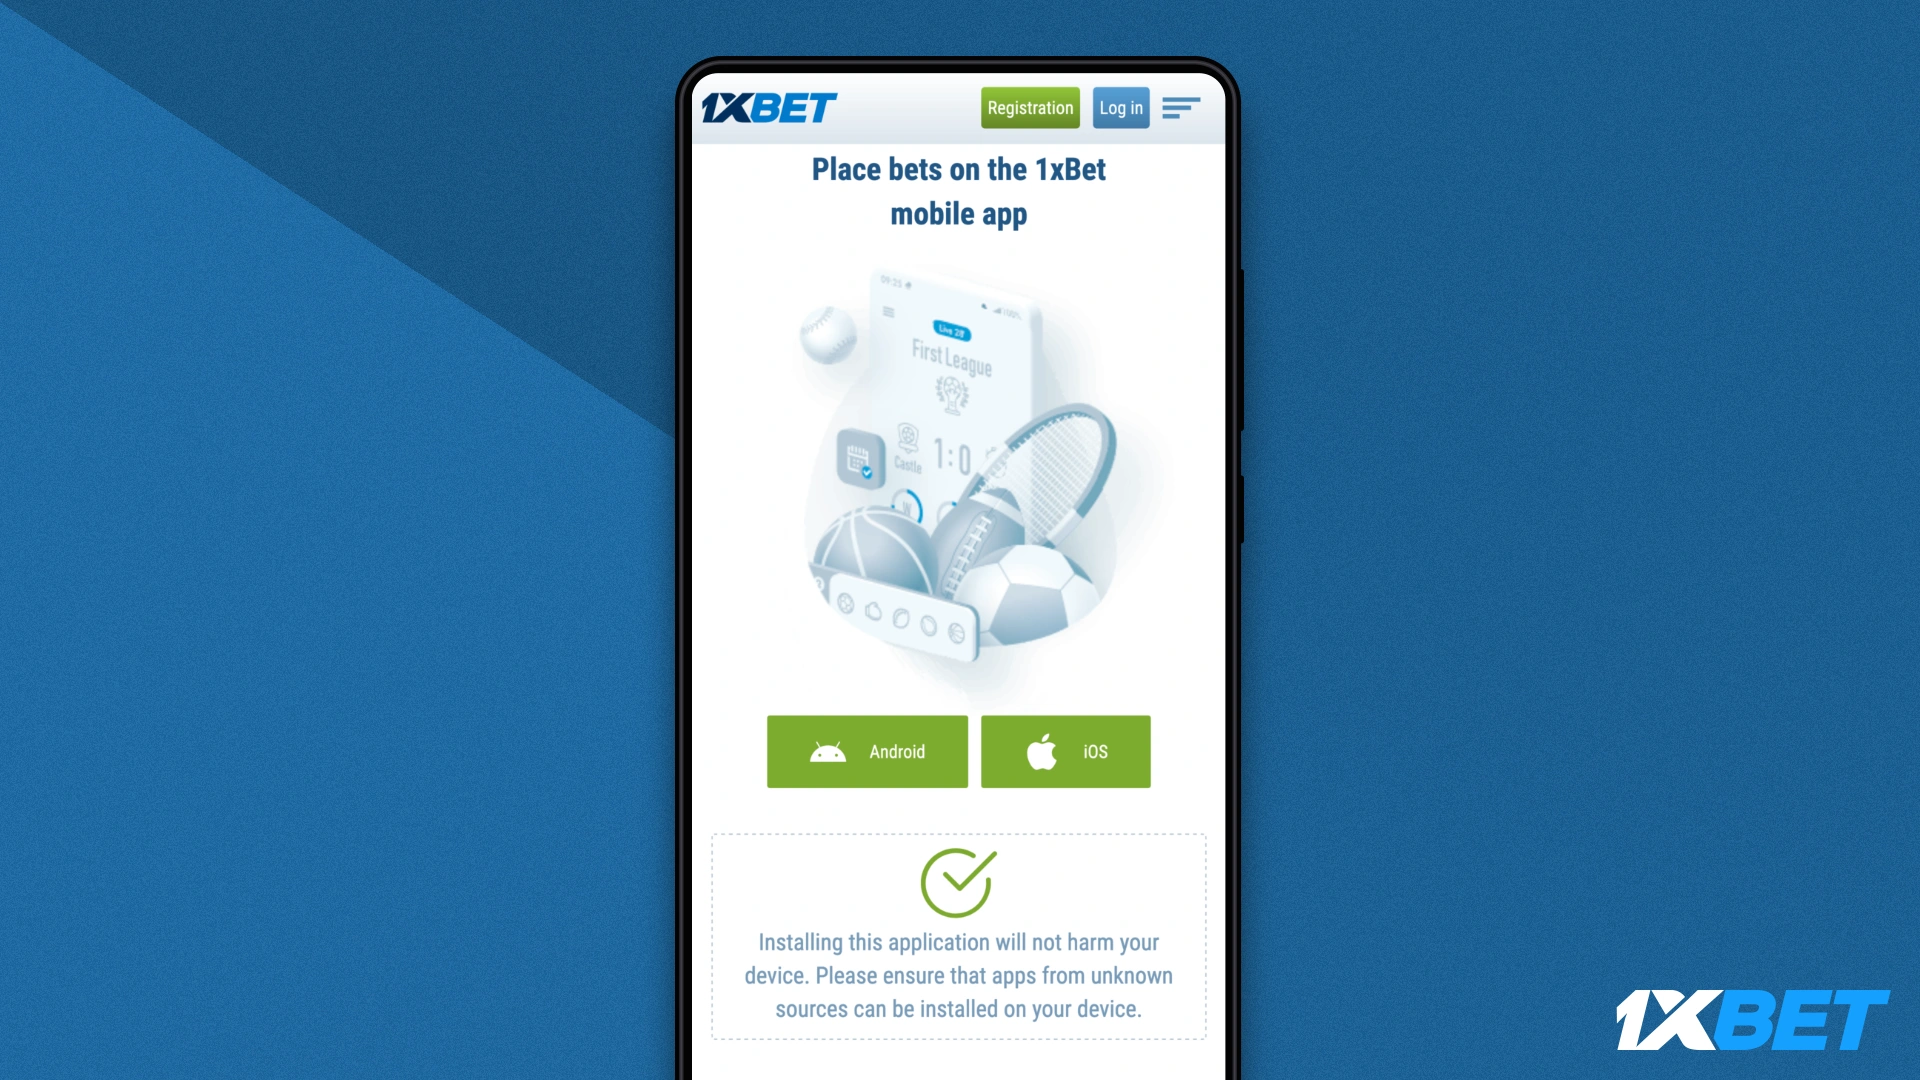 Download the 1xBet APK file on your smartphone to install the app on your Android smartphone or tablet